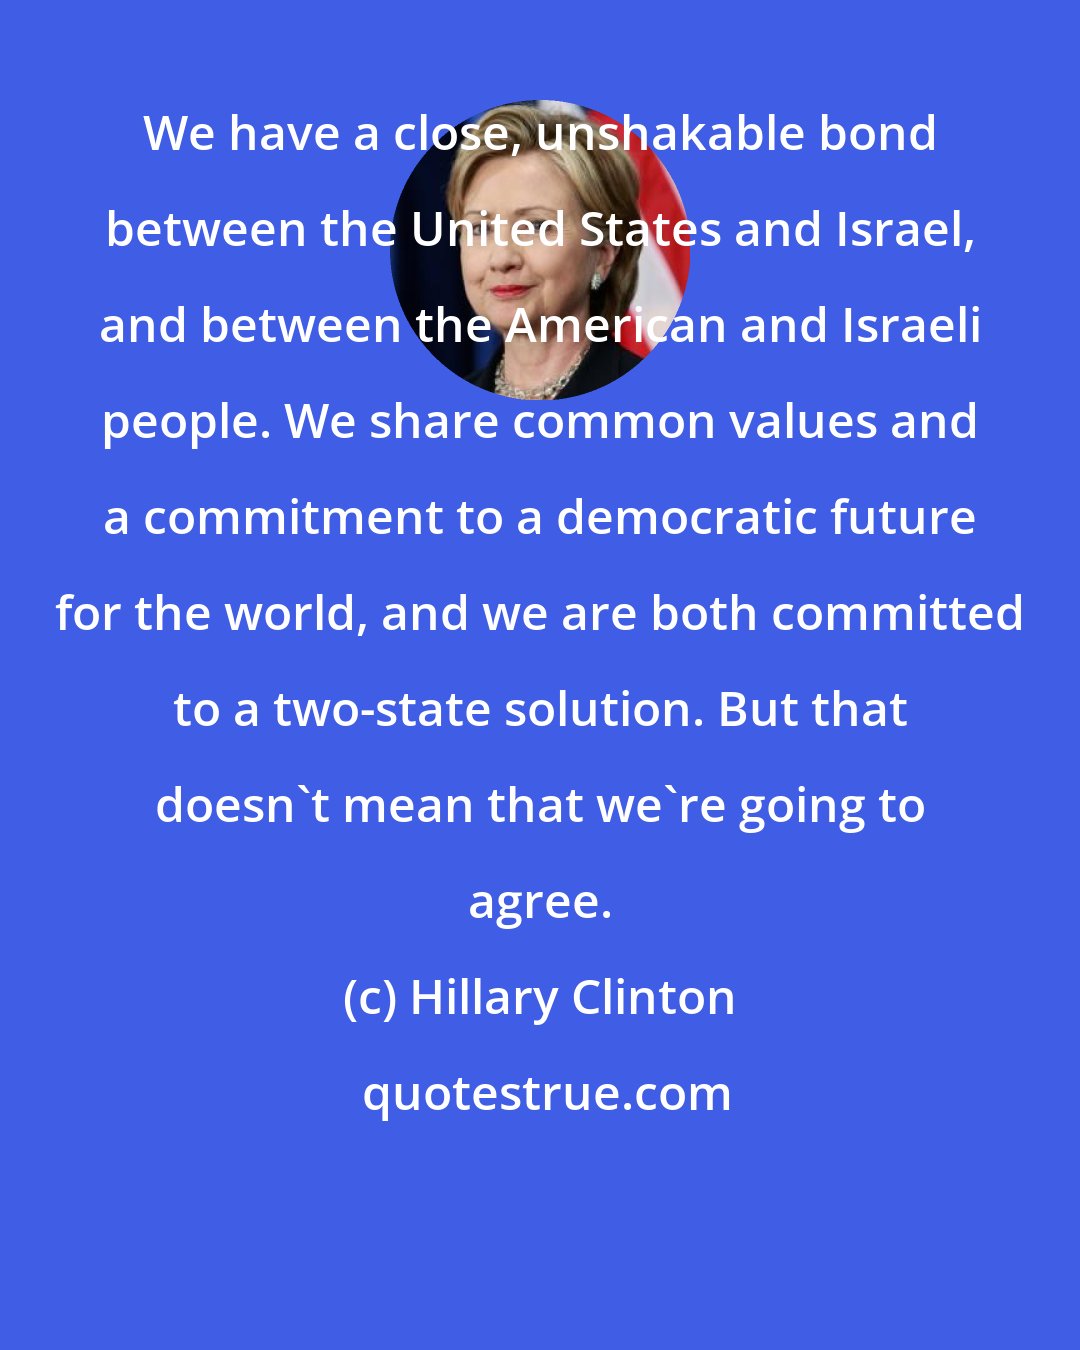 Hillary Clinton: We have a close, unshakable bond between the United States and Israel, and between the American and Israeli people. We share common values and a commitment to a democratic future for the world, and we are both committed to a two-state solution. But that doesn't mean that we're going to agree.